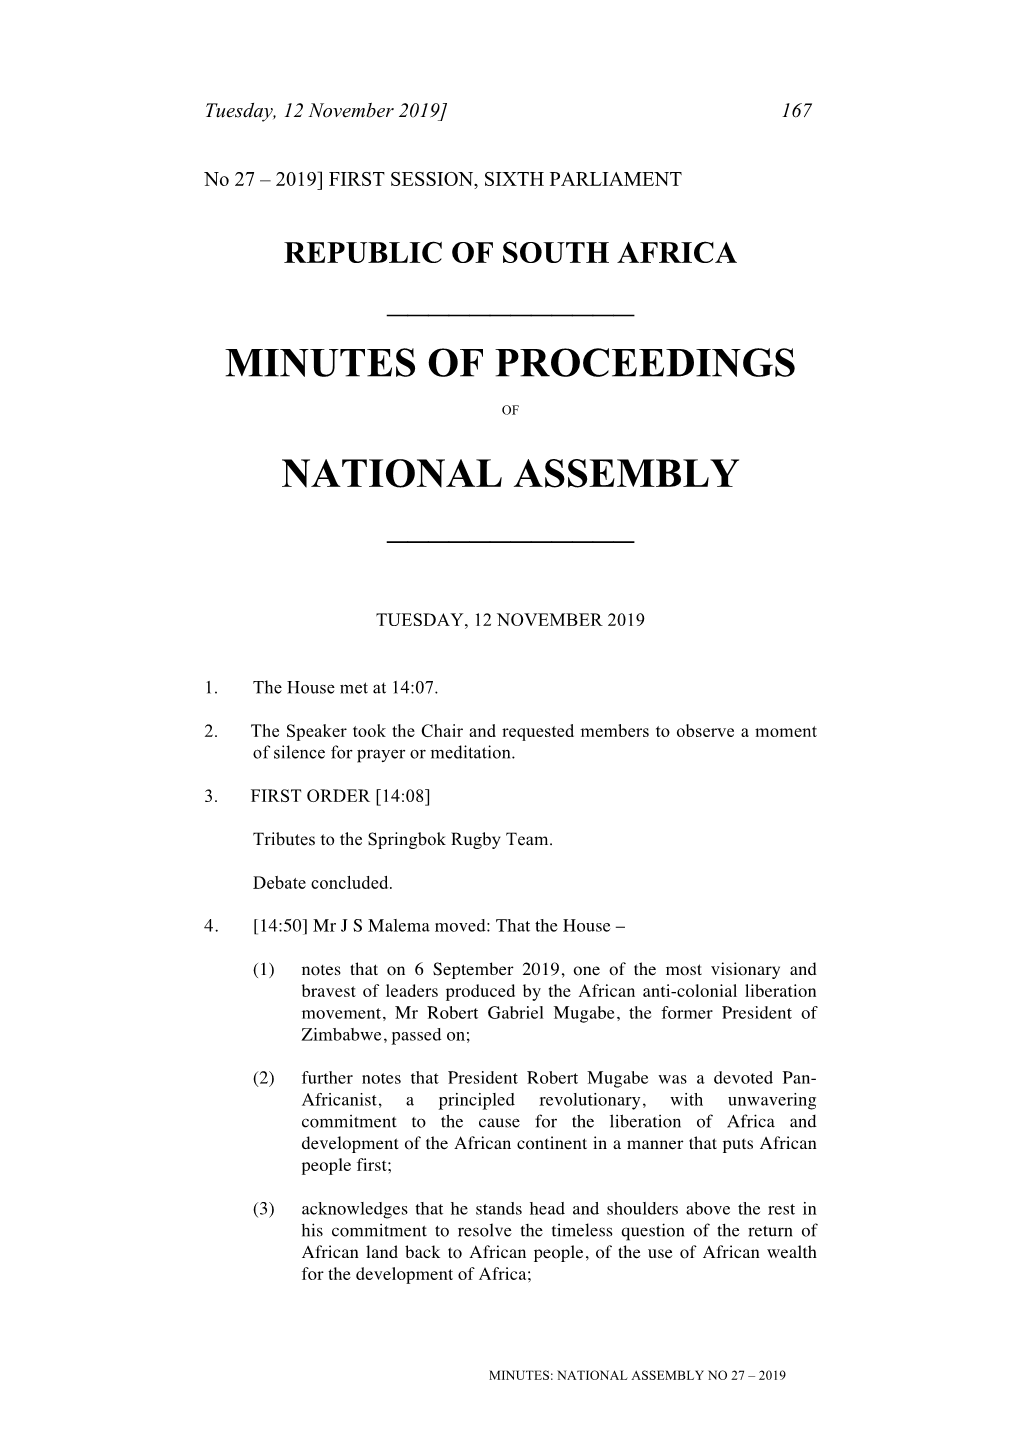 Minutes of Proceedings National Assembly